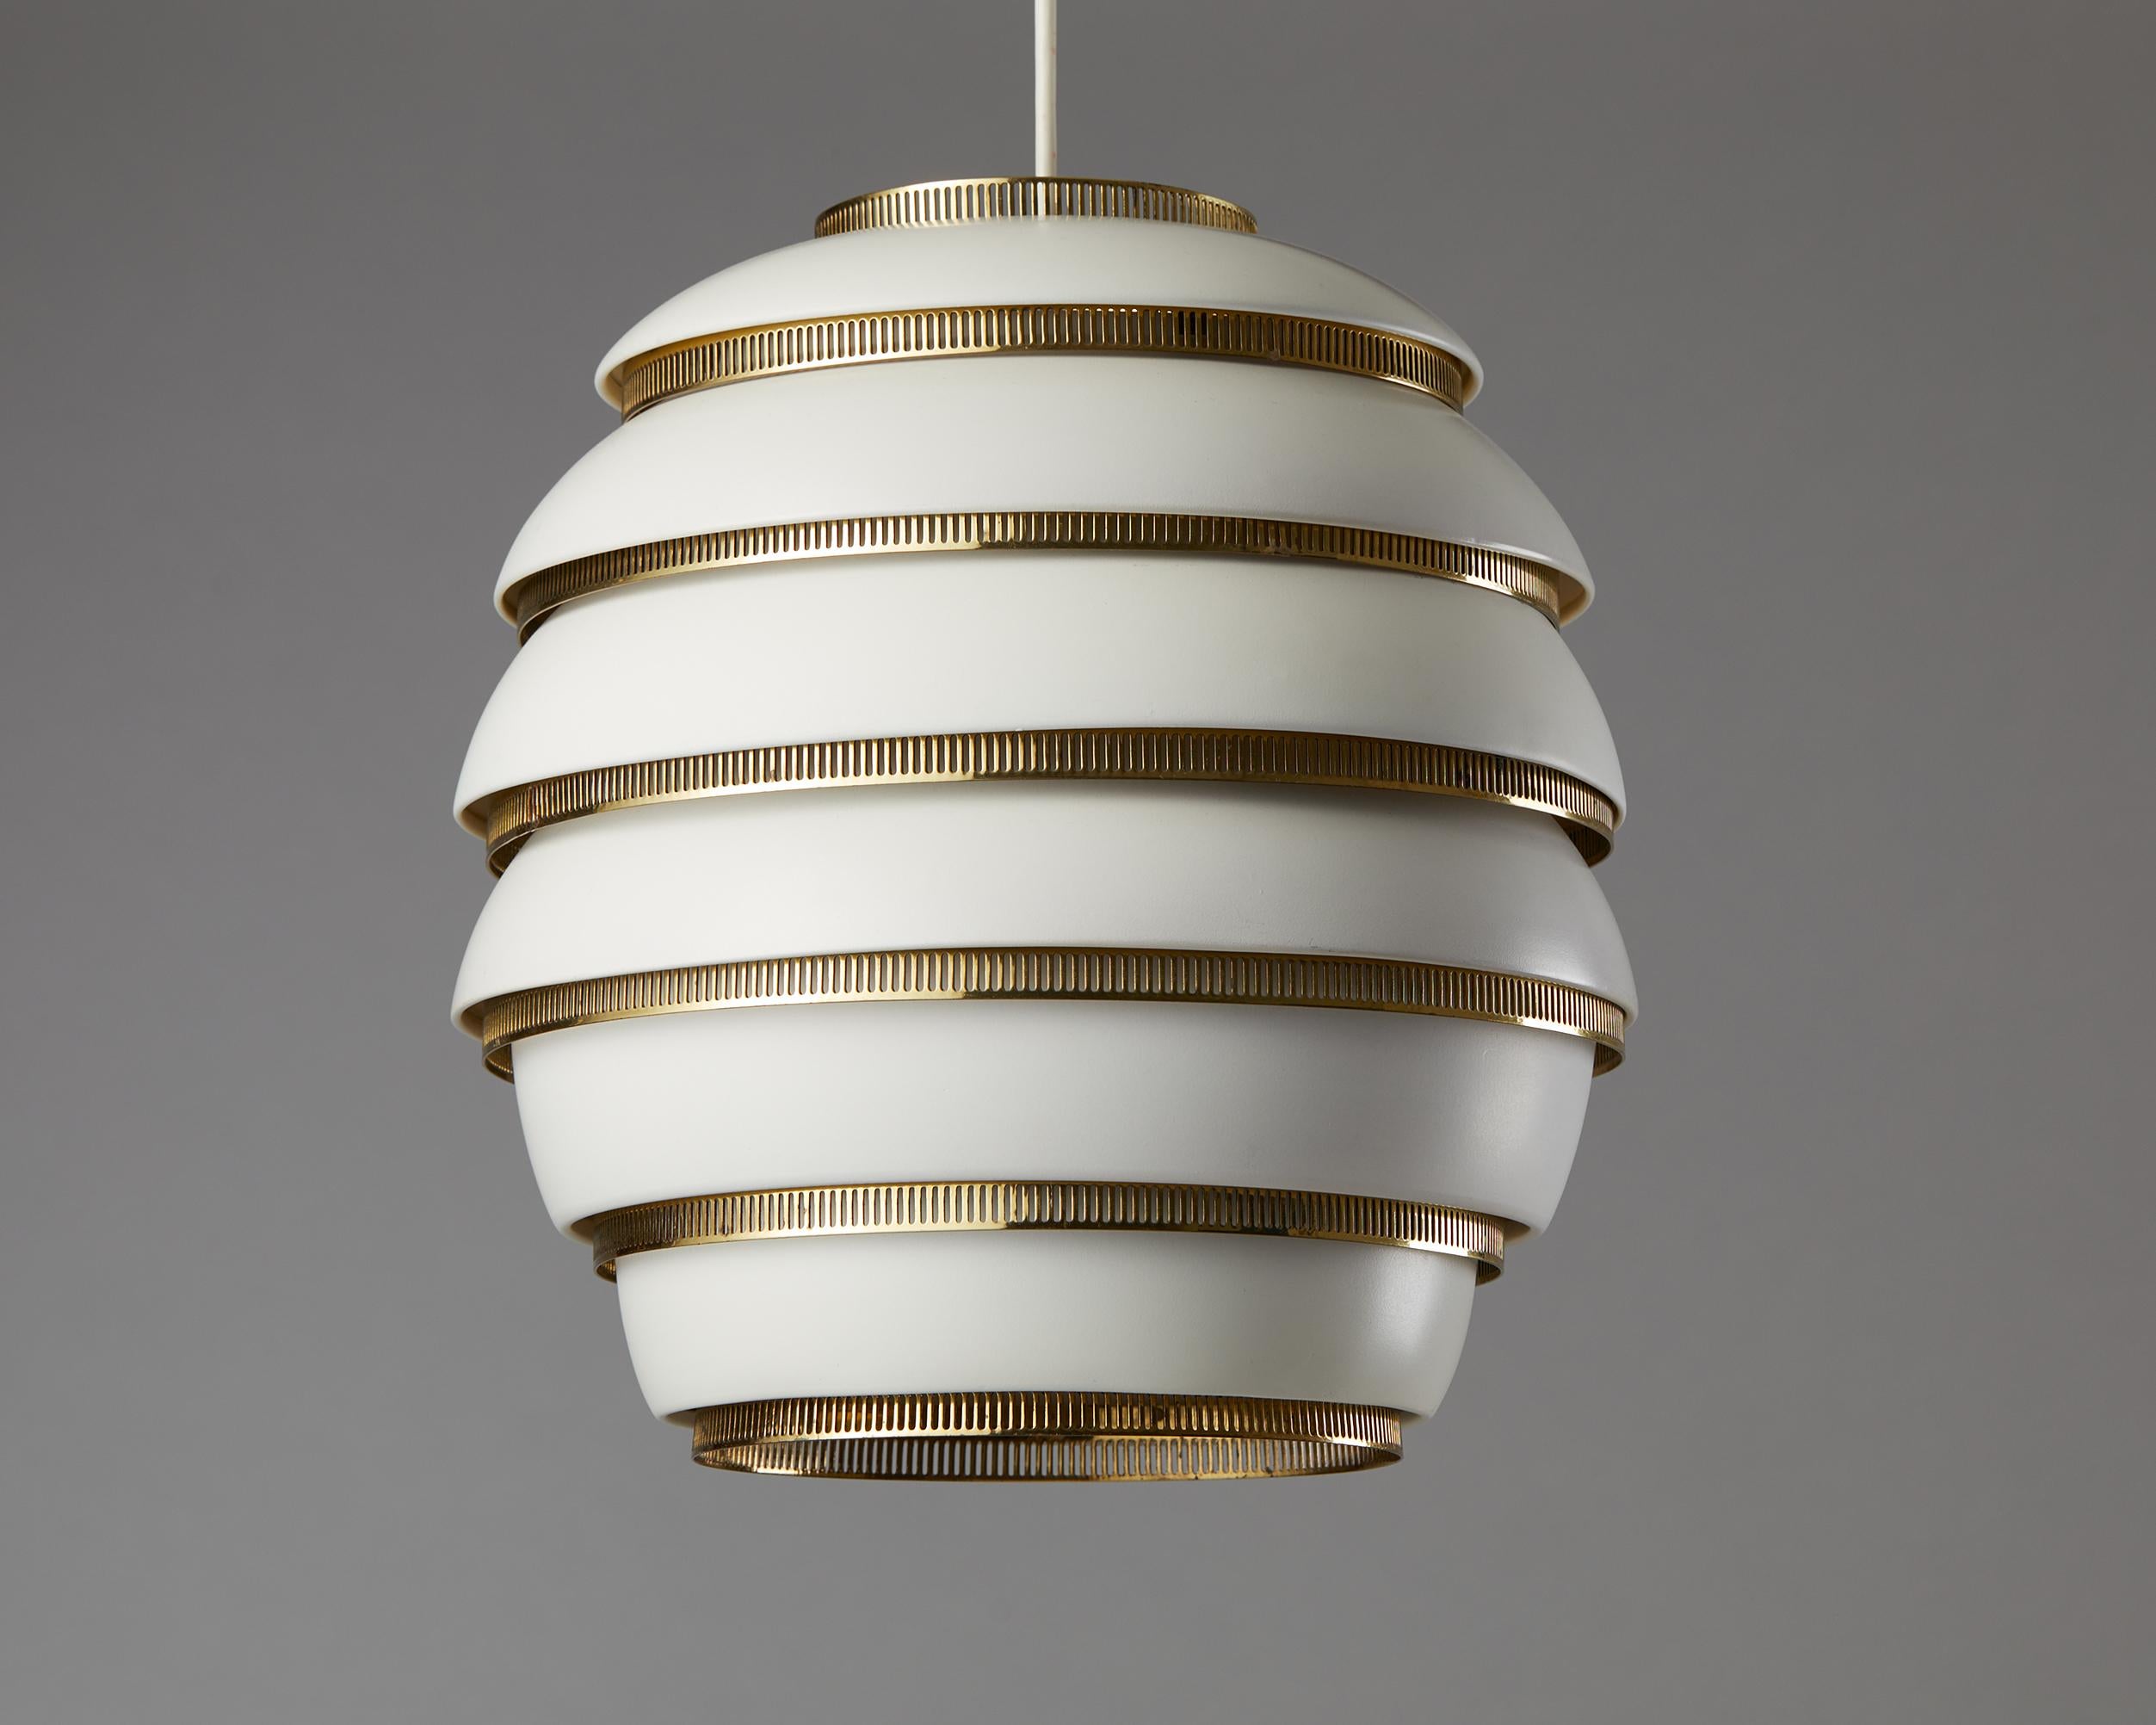 Ceiling lamp ‘Beehive’ model A332 designed by Alvar Aalto for Valaistustyo,
Finland. 1953.

Painted aluminium and polished brass.

Early six tier version.

Engraved ‘A332 Valaistustyo’.

Measures: 
Height: 36 cm / 1' 2